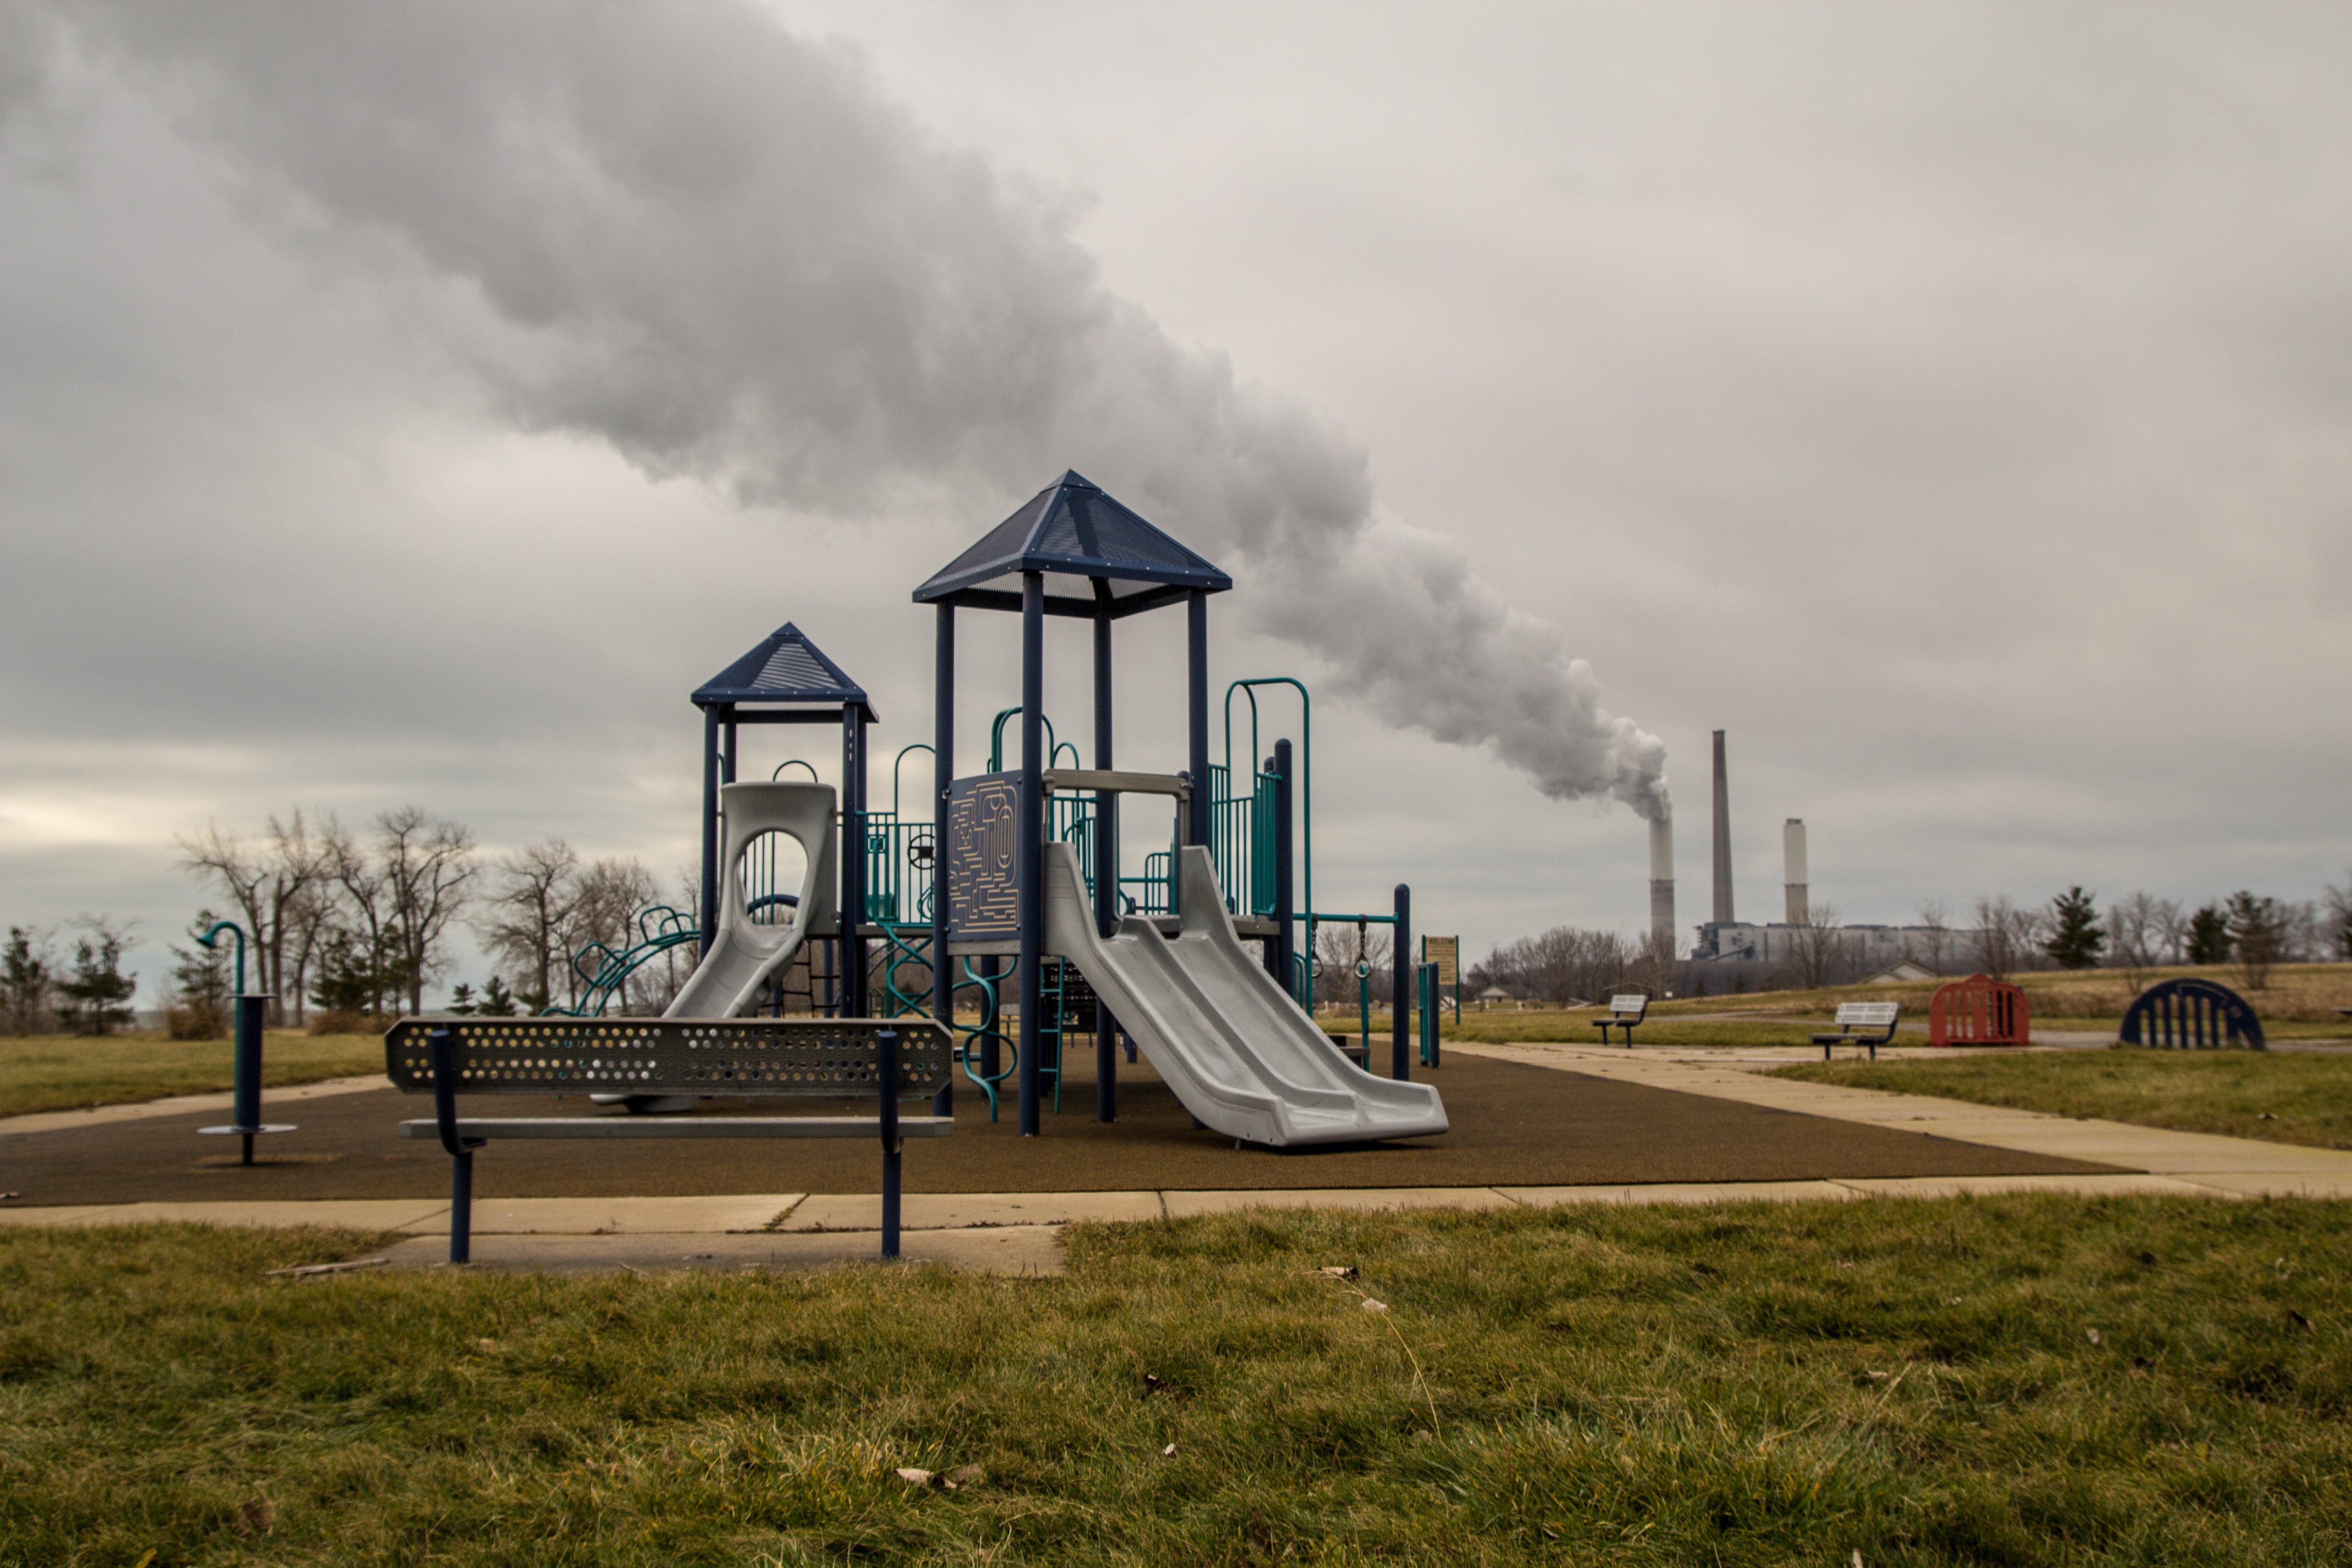  Playground at Sterling State Park with billowing smokestack in the background.